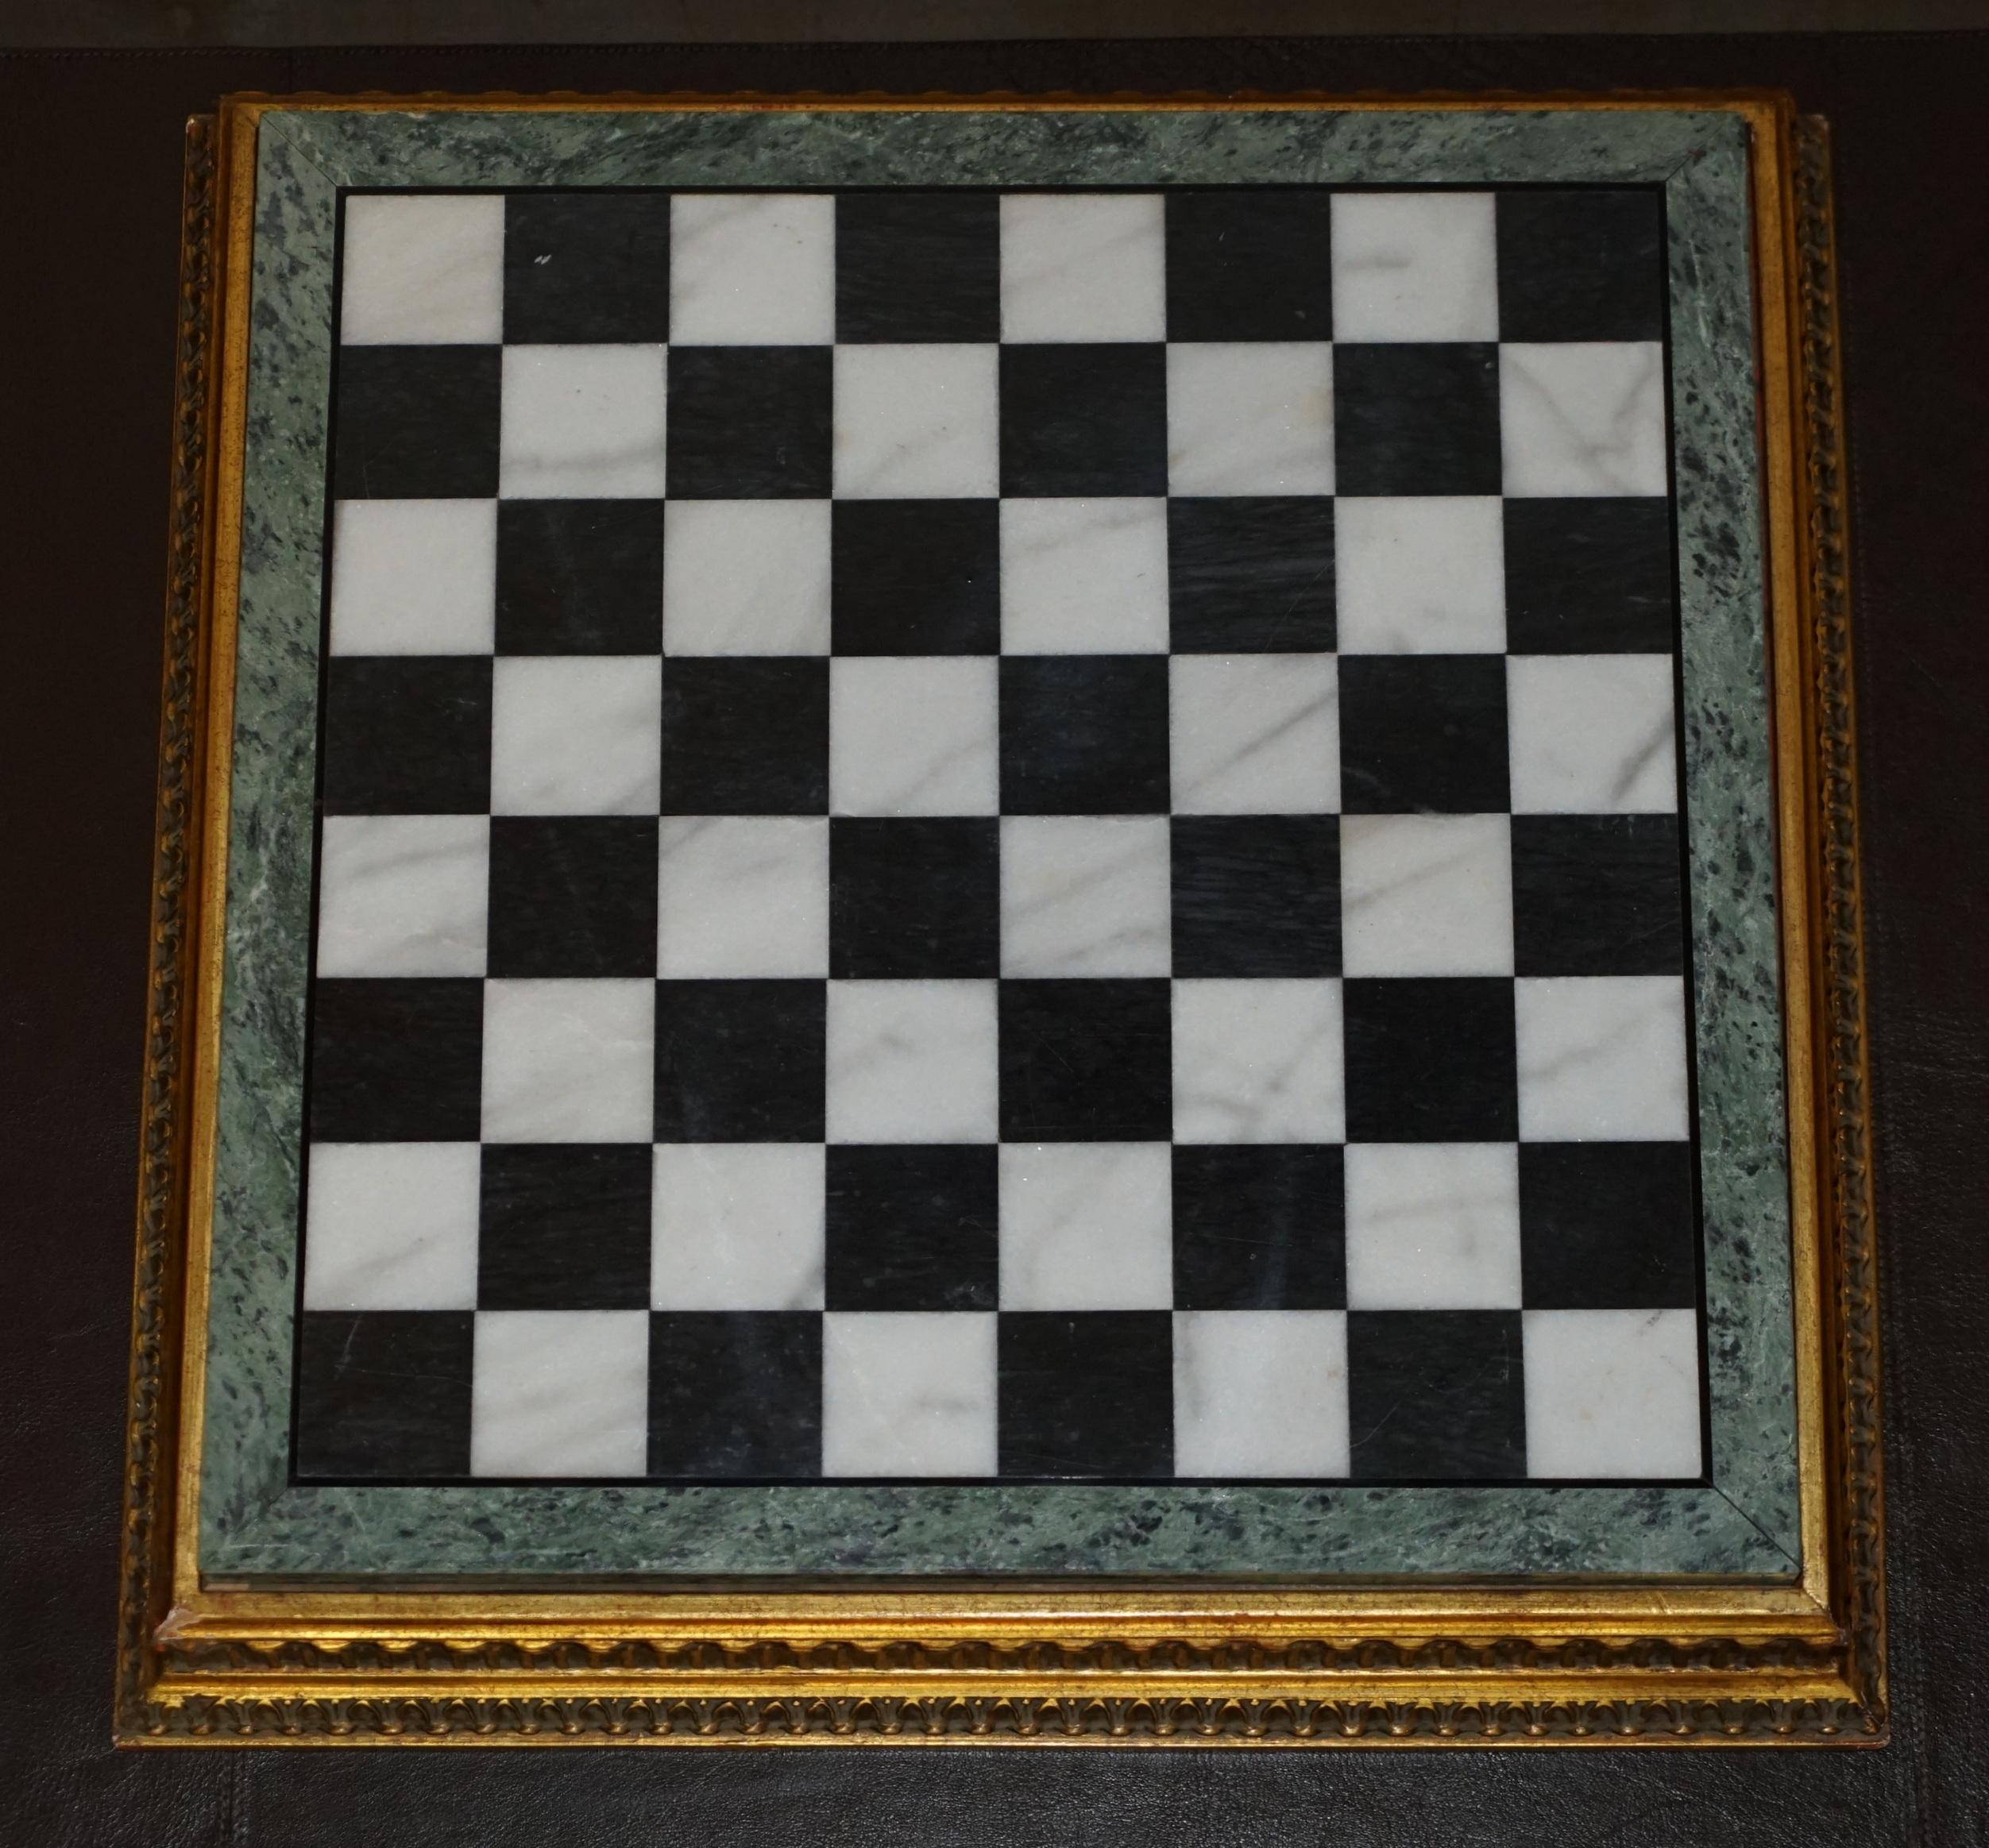 Antique Victorian Staunton Chess Pieces Set + Italian Marble Giltwood Chessboard For Sale 4